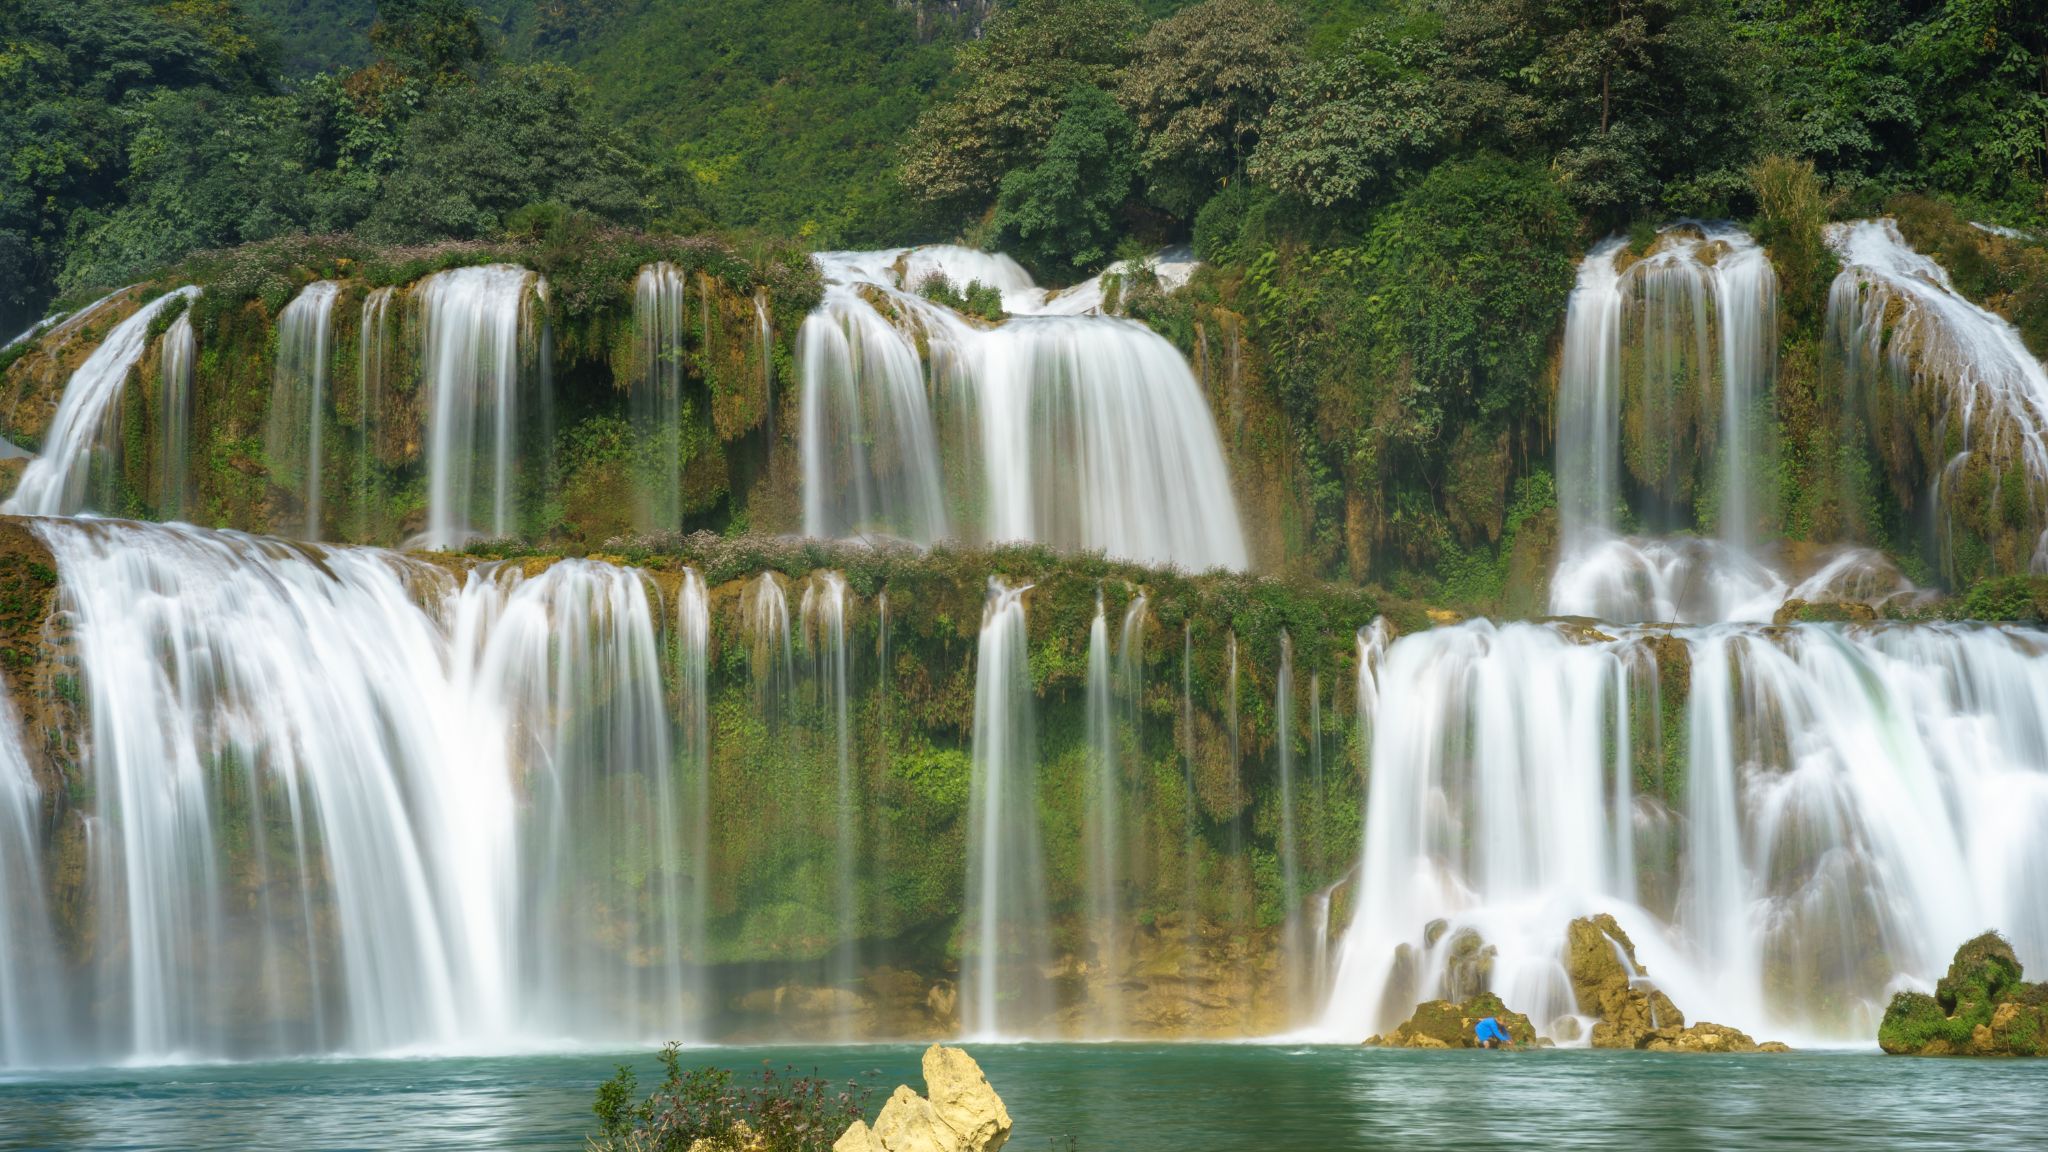 Day 8 Admire The Marvelous Ban Gioc Waterfall